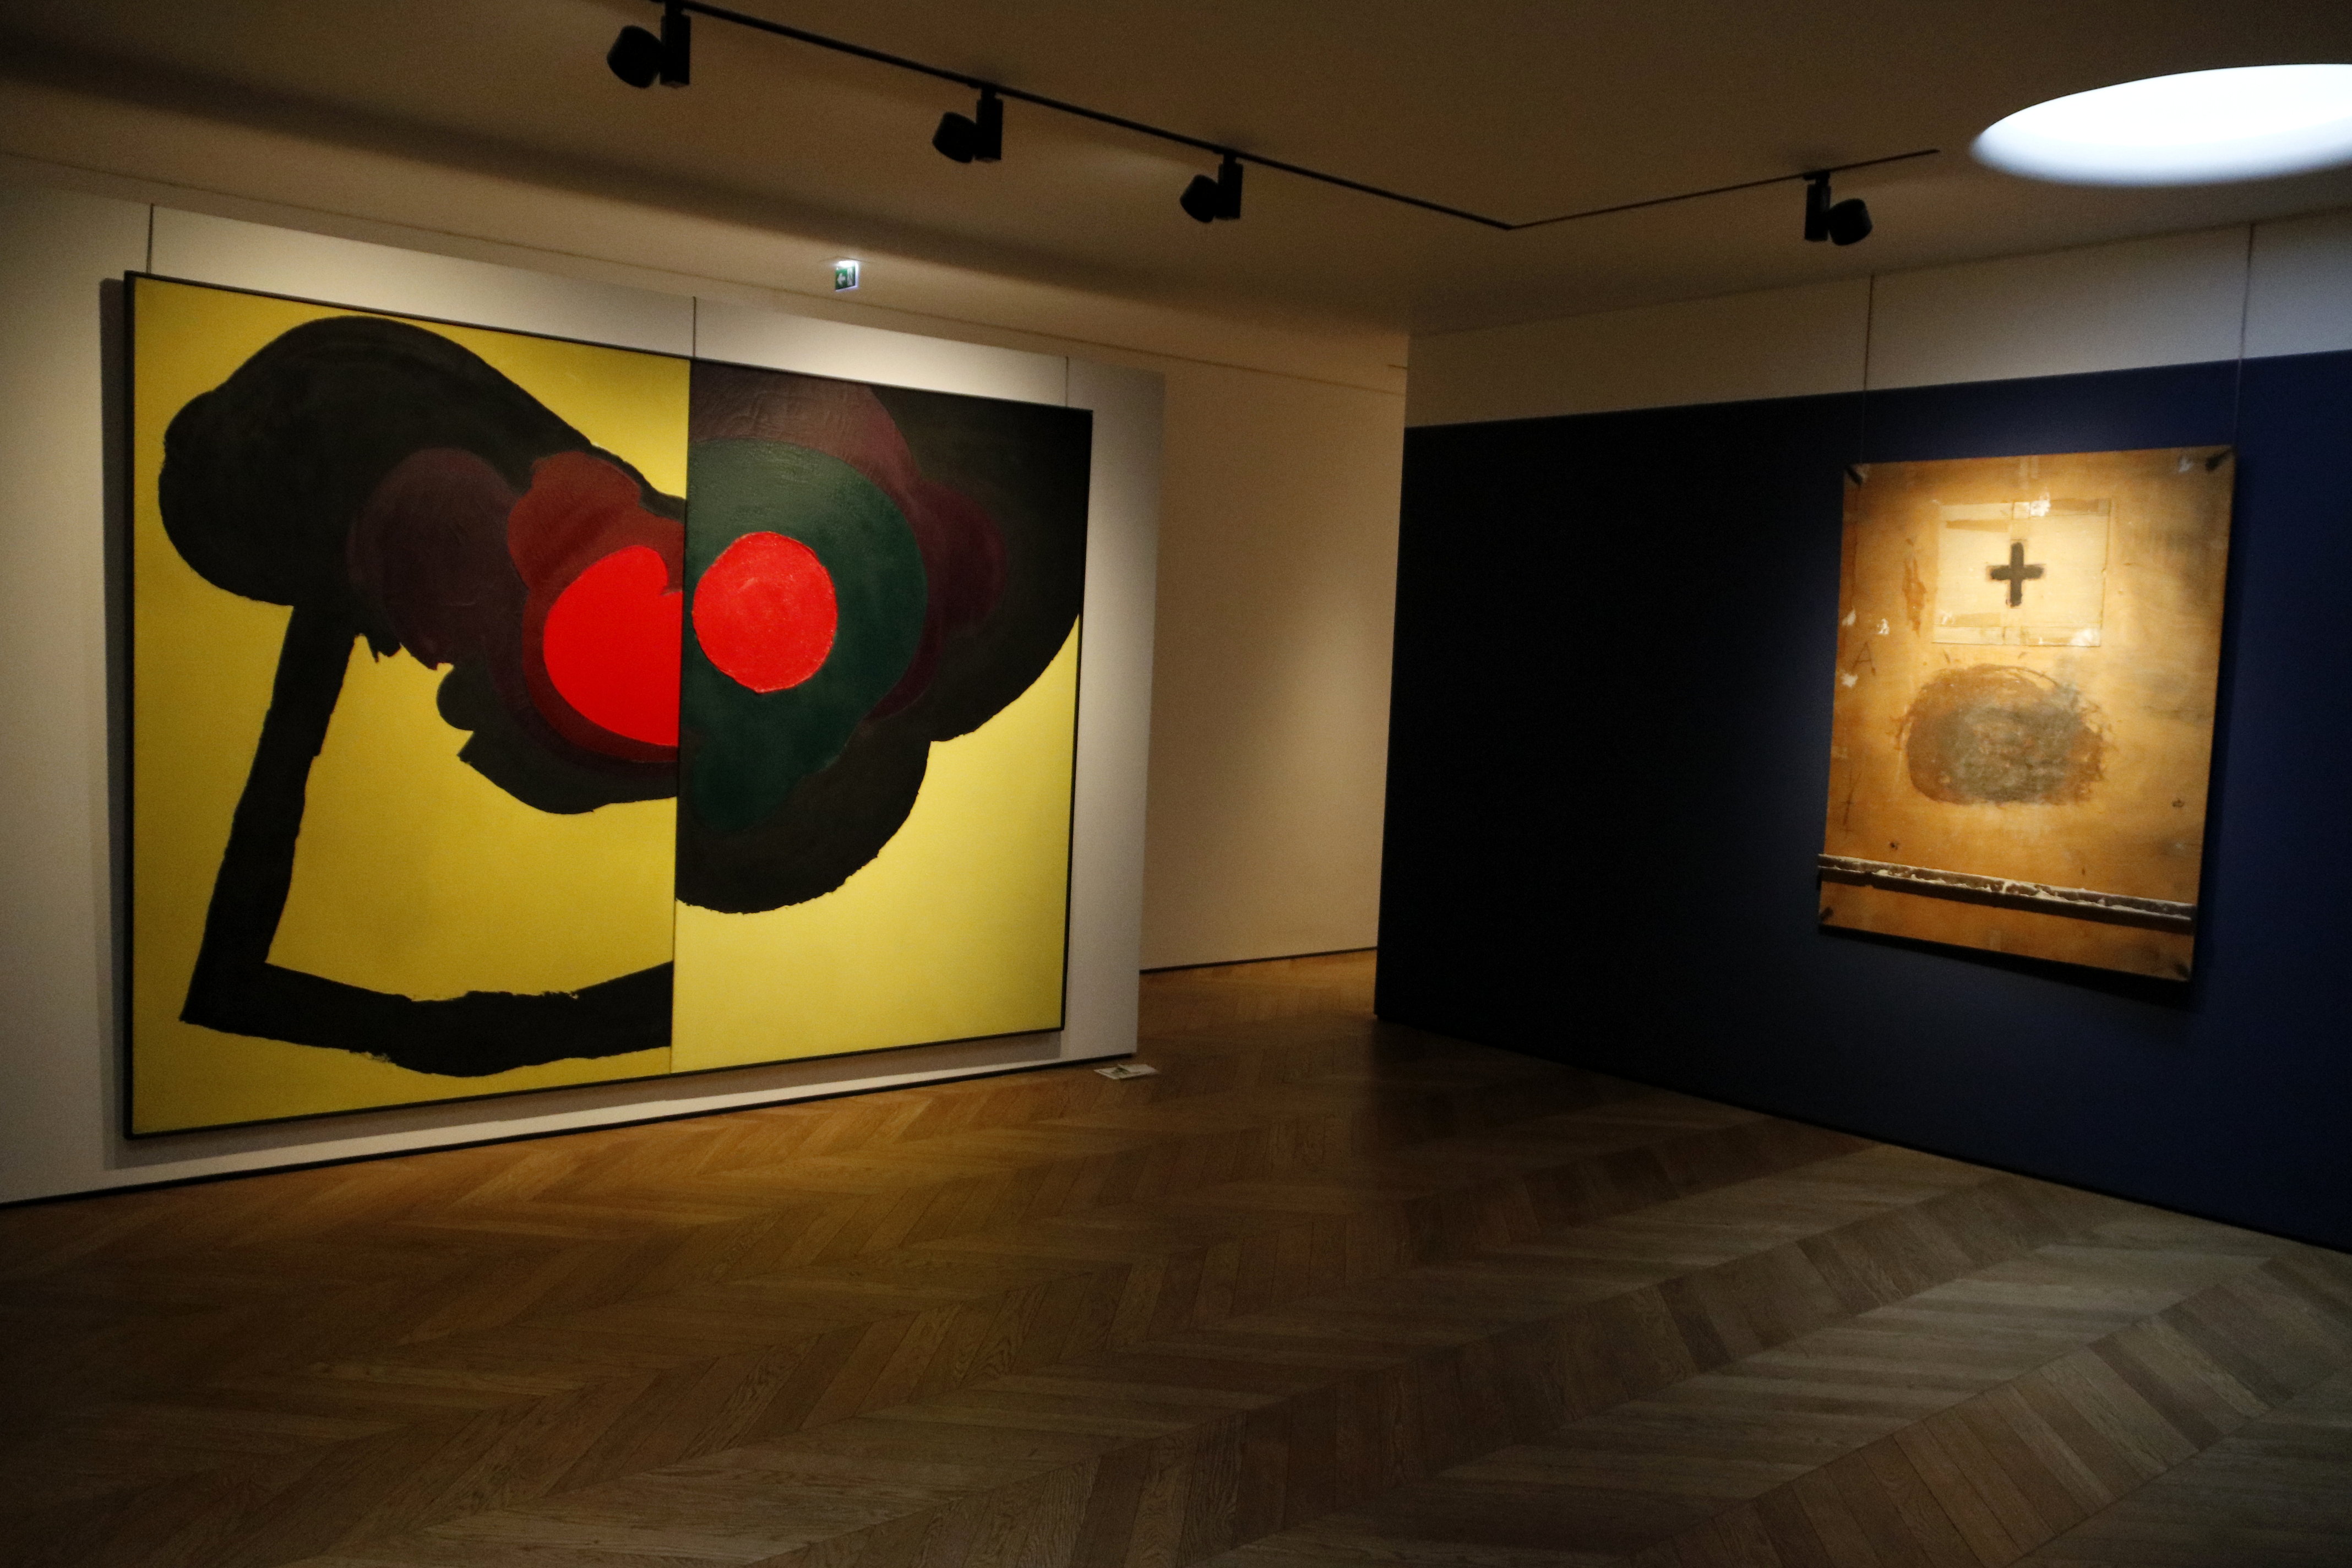 On the left, a piece by Luis Feito, and on the right, art by Antoni Tàpies at the Colnaghi art gallery in London on February 26 2018 (by Guillem Roset)